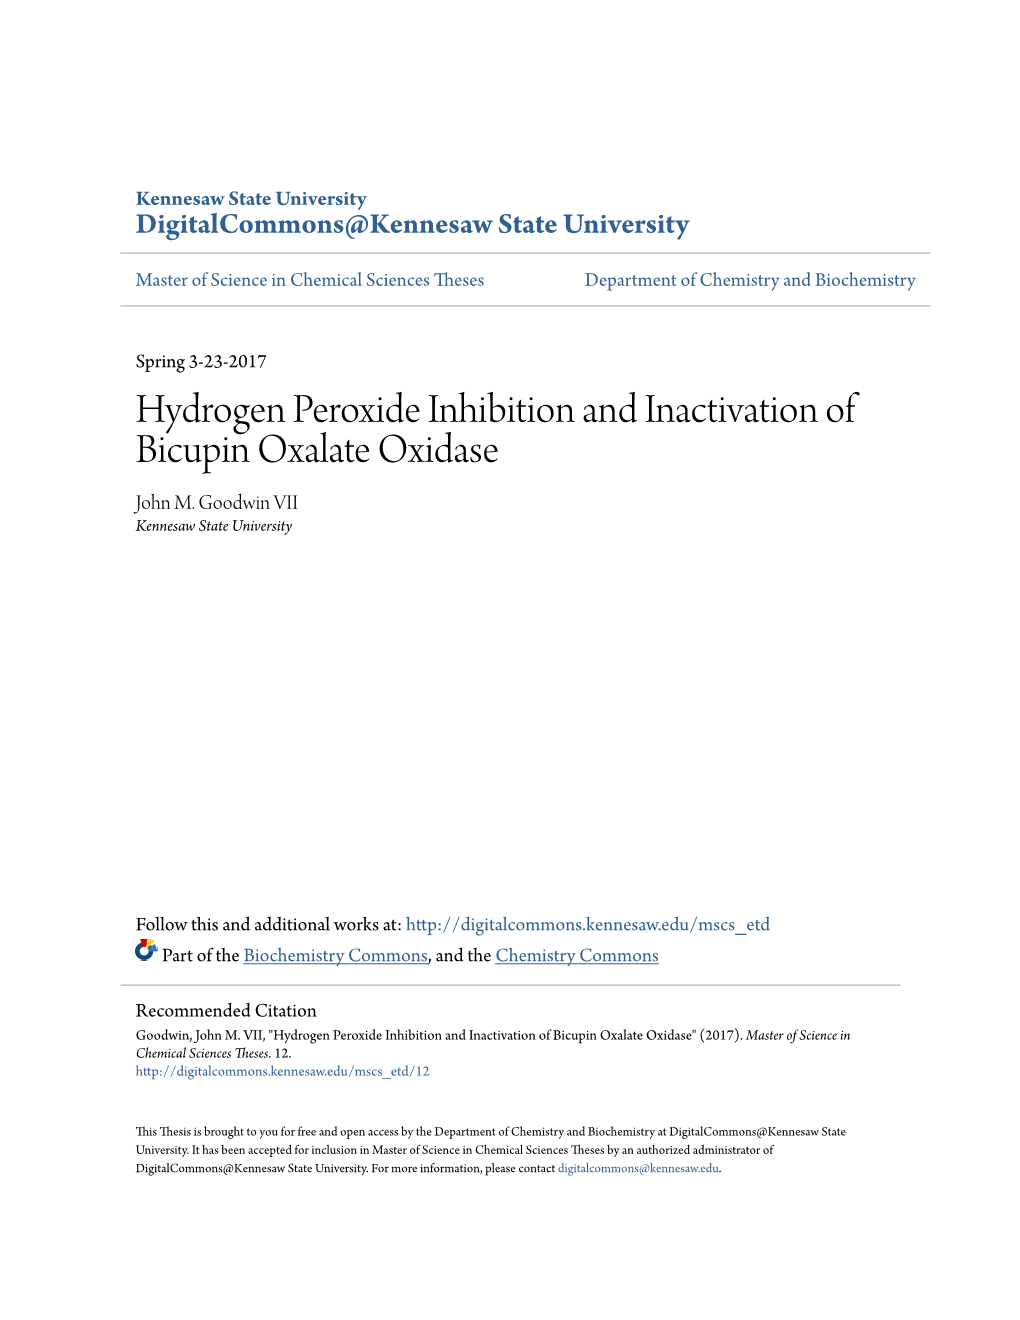 Hydrogen Peroxide Inhibition and Inactivation of Bicupin Oxalate Oxidase John M